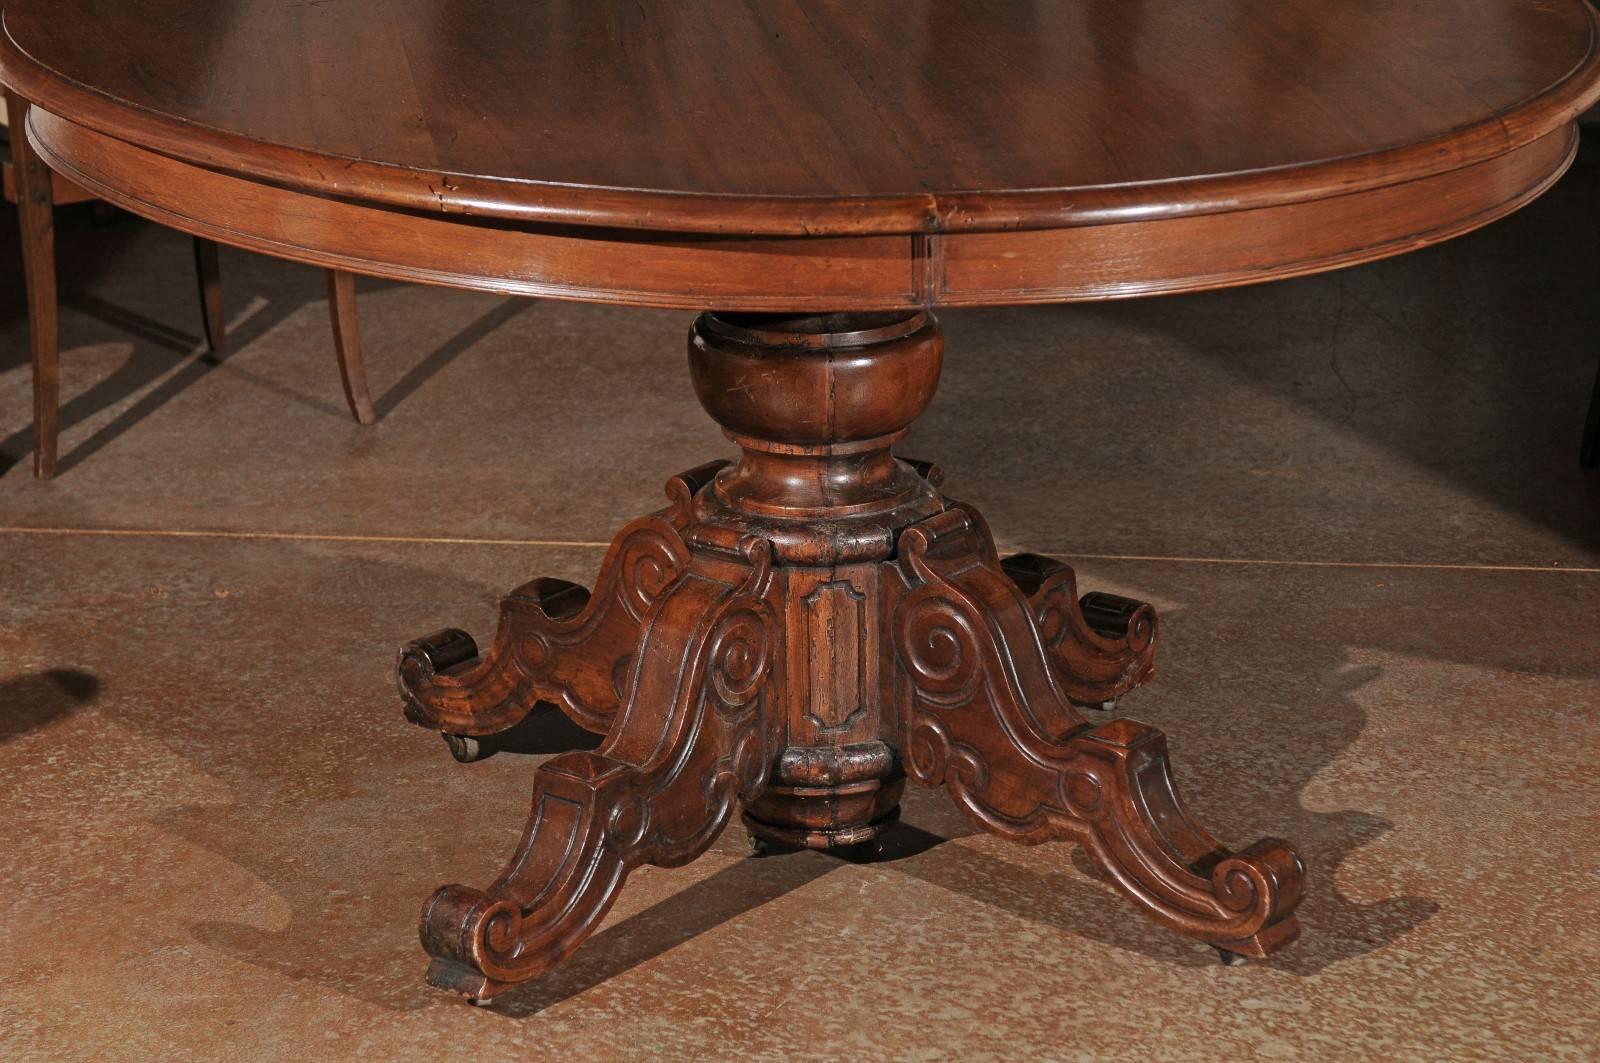 Napoleon III French Napoléon III Walnut Pedestal Table with Carved Feet from the 1850s